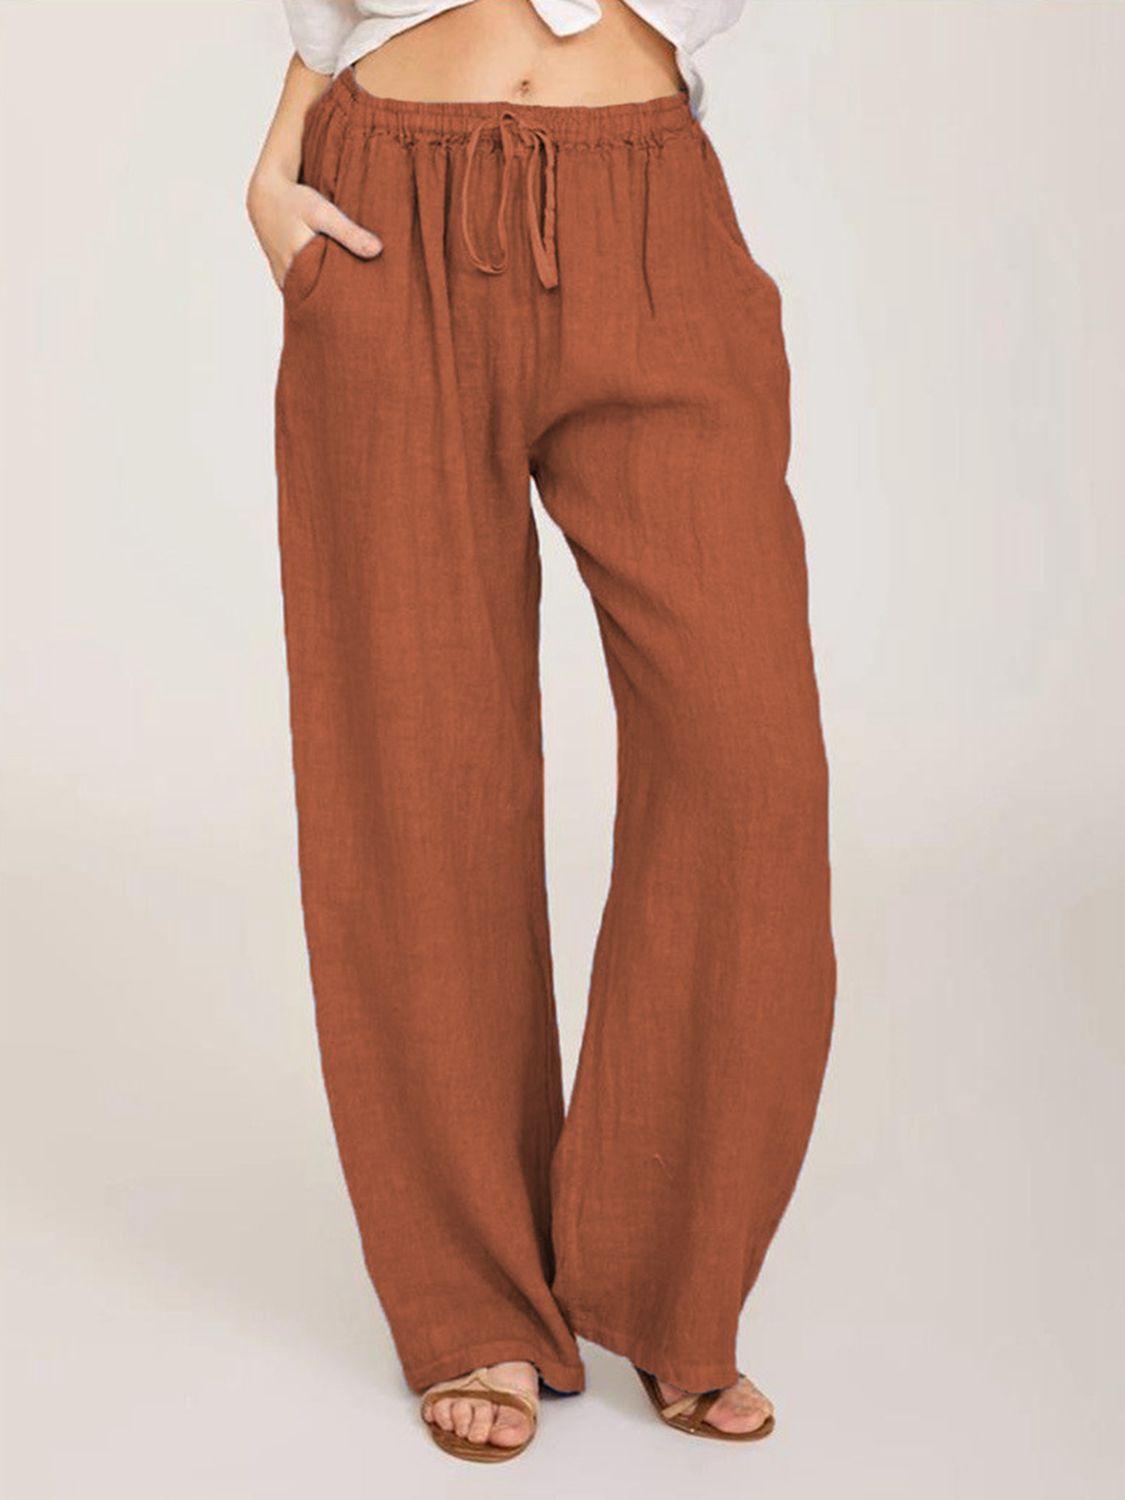 Essential Women's Long Pants: Must-Have for Everyday Casual Style - Add to Cart